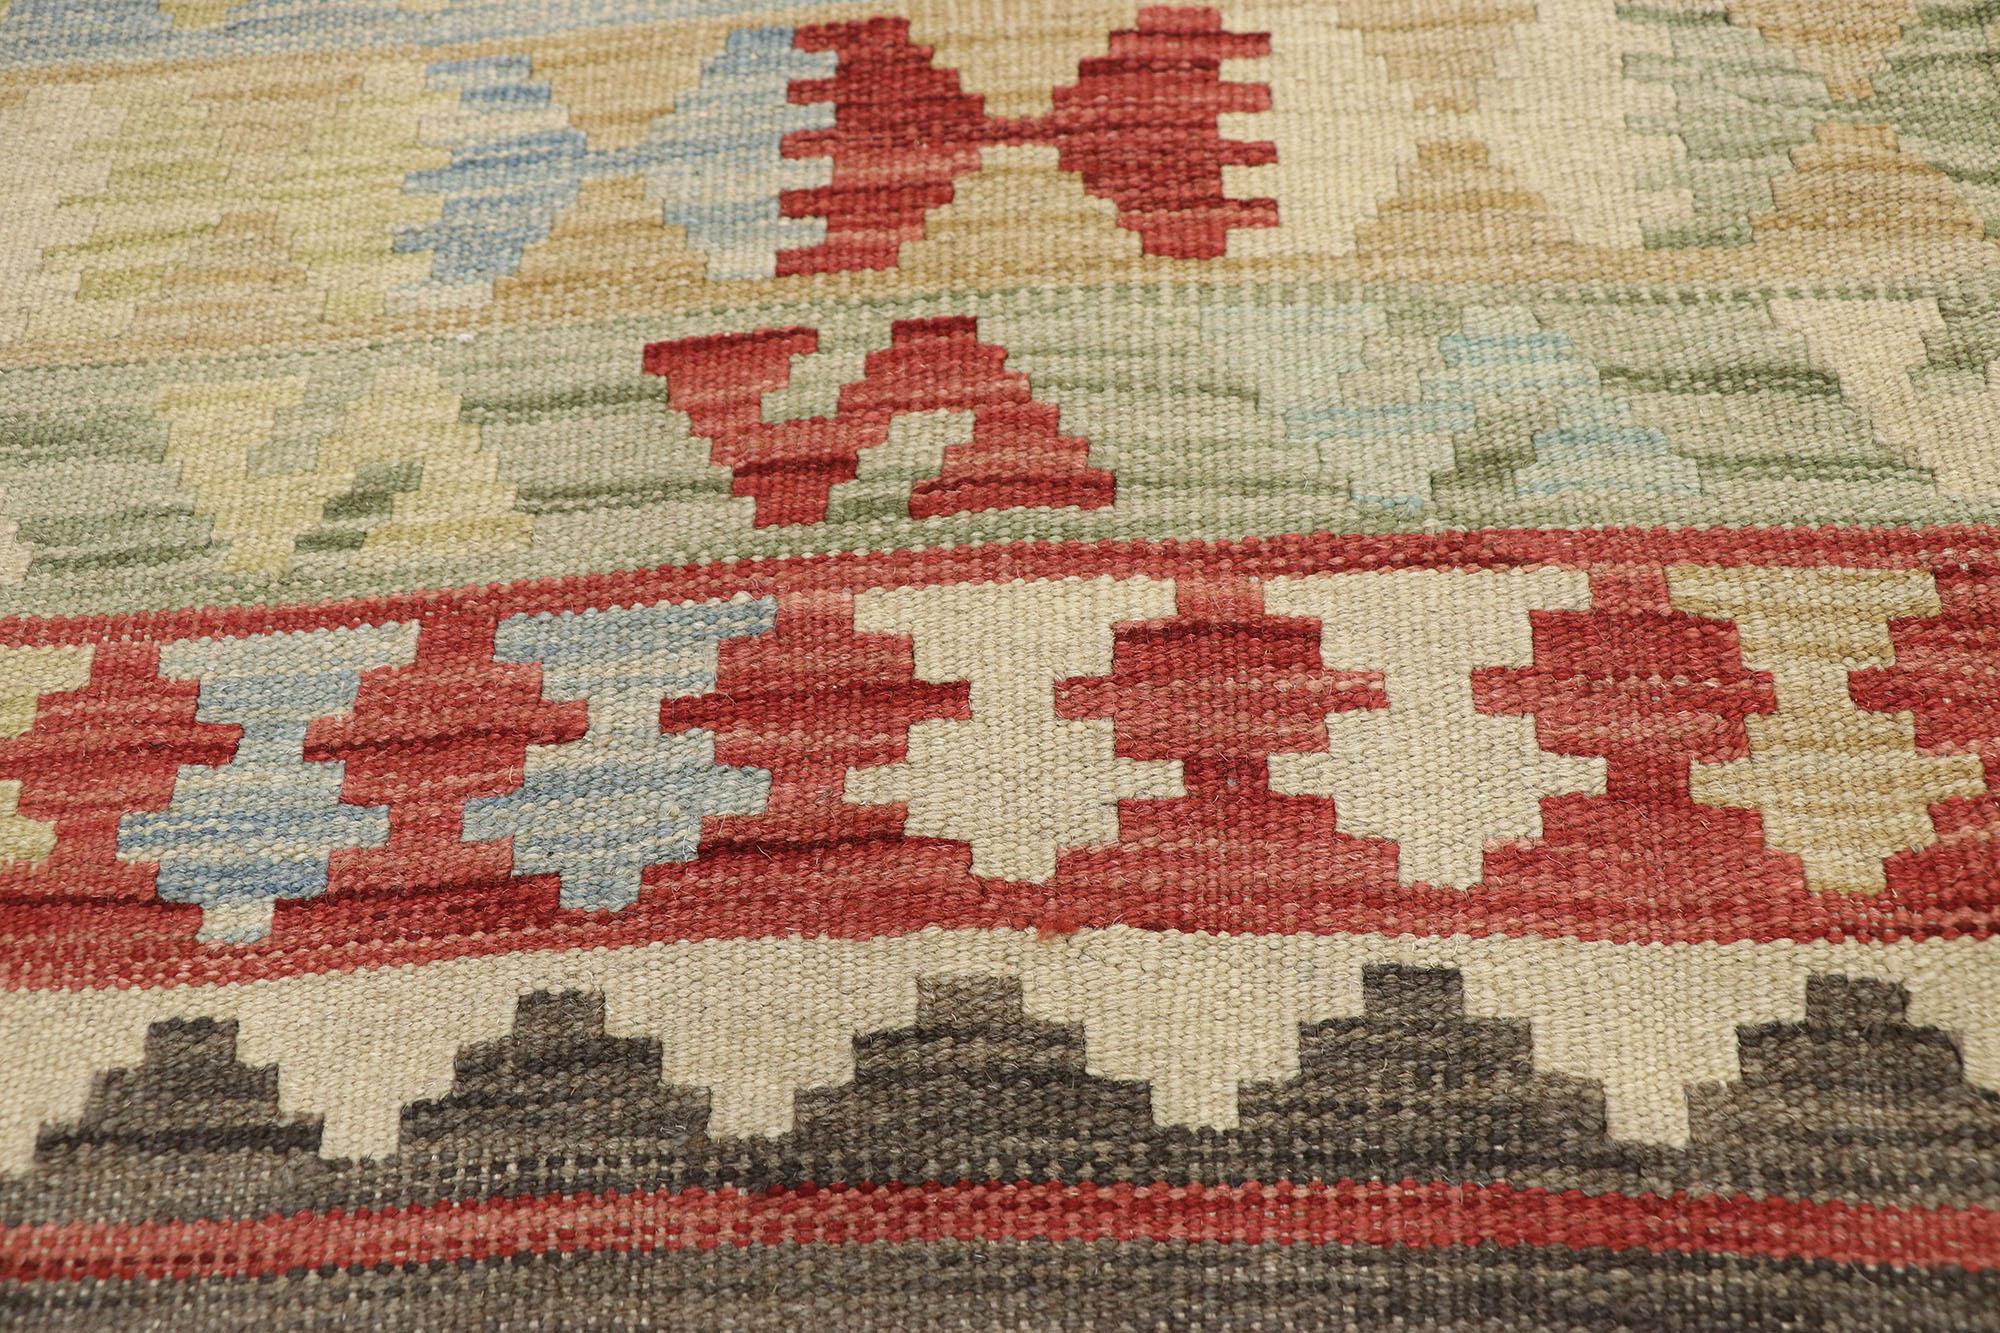 Vintage Afghan Kilim Rug, Southwest Desert Meets Contemporary Santa Fe In Good Condition For Sale In Dallas, TX